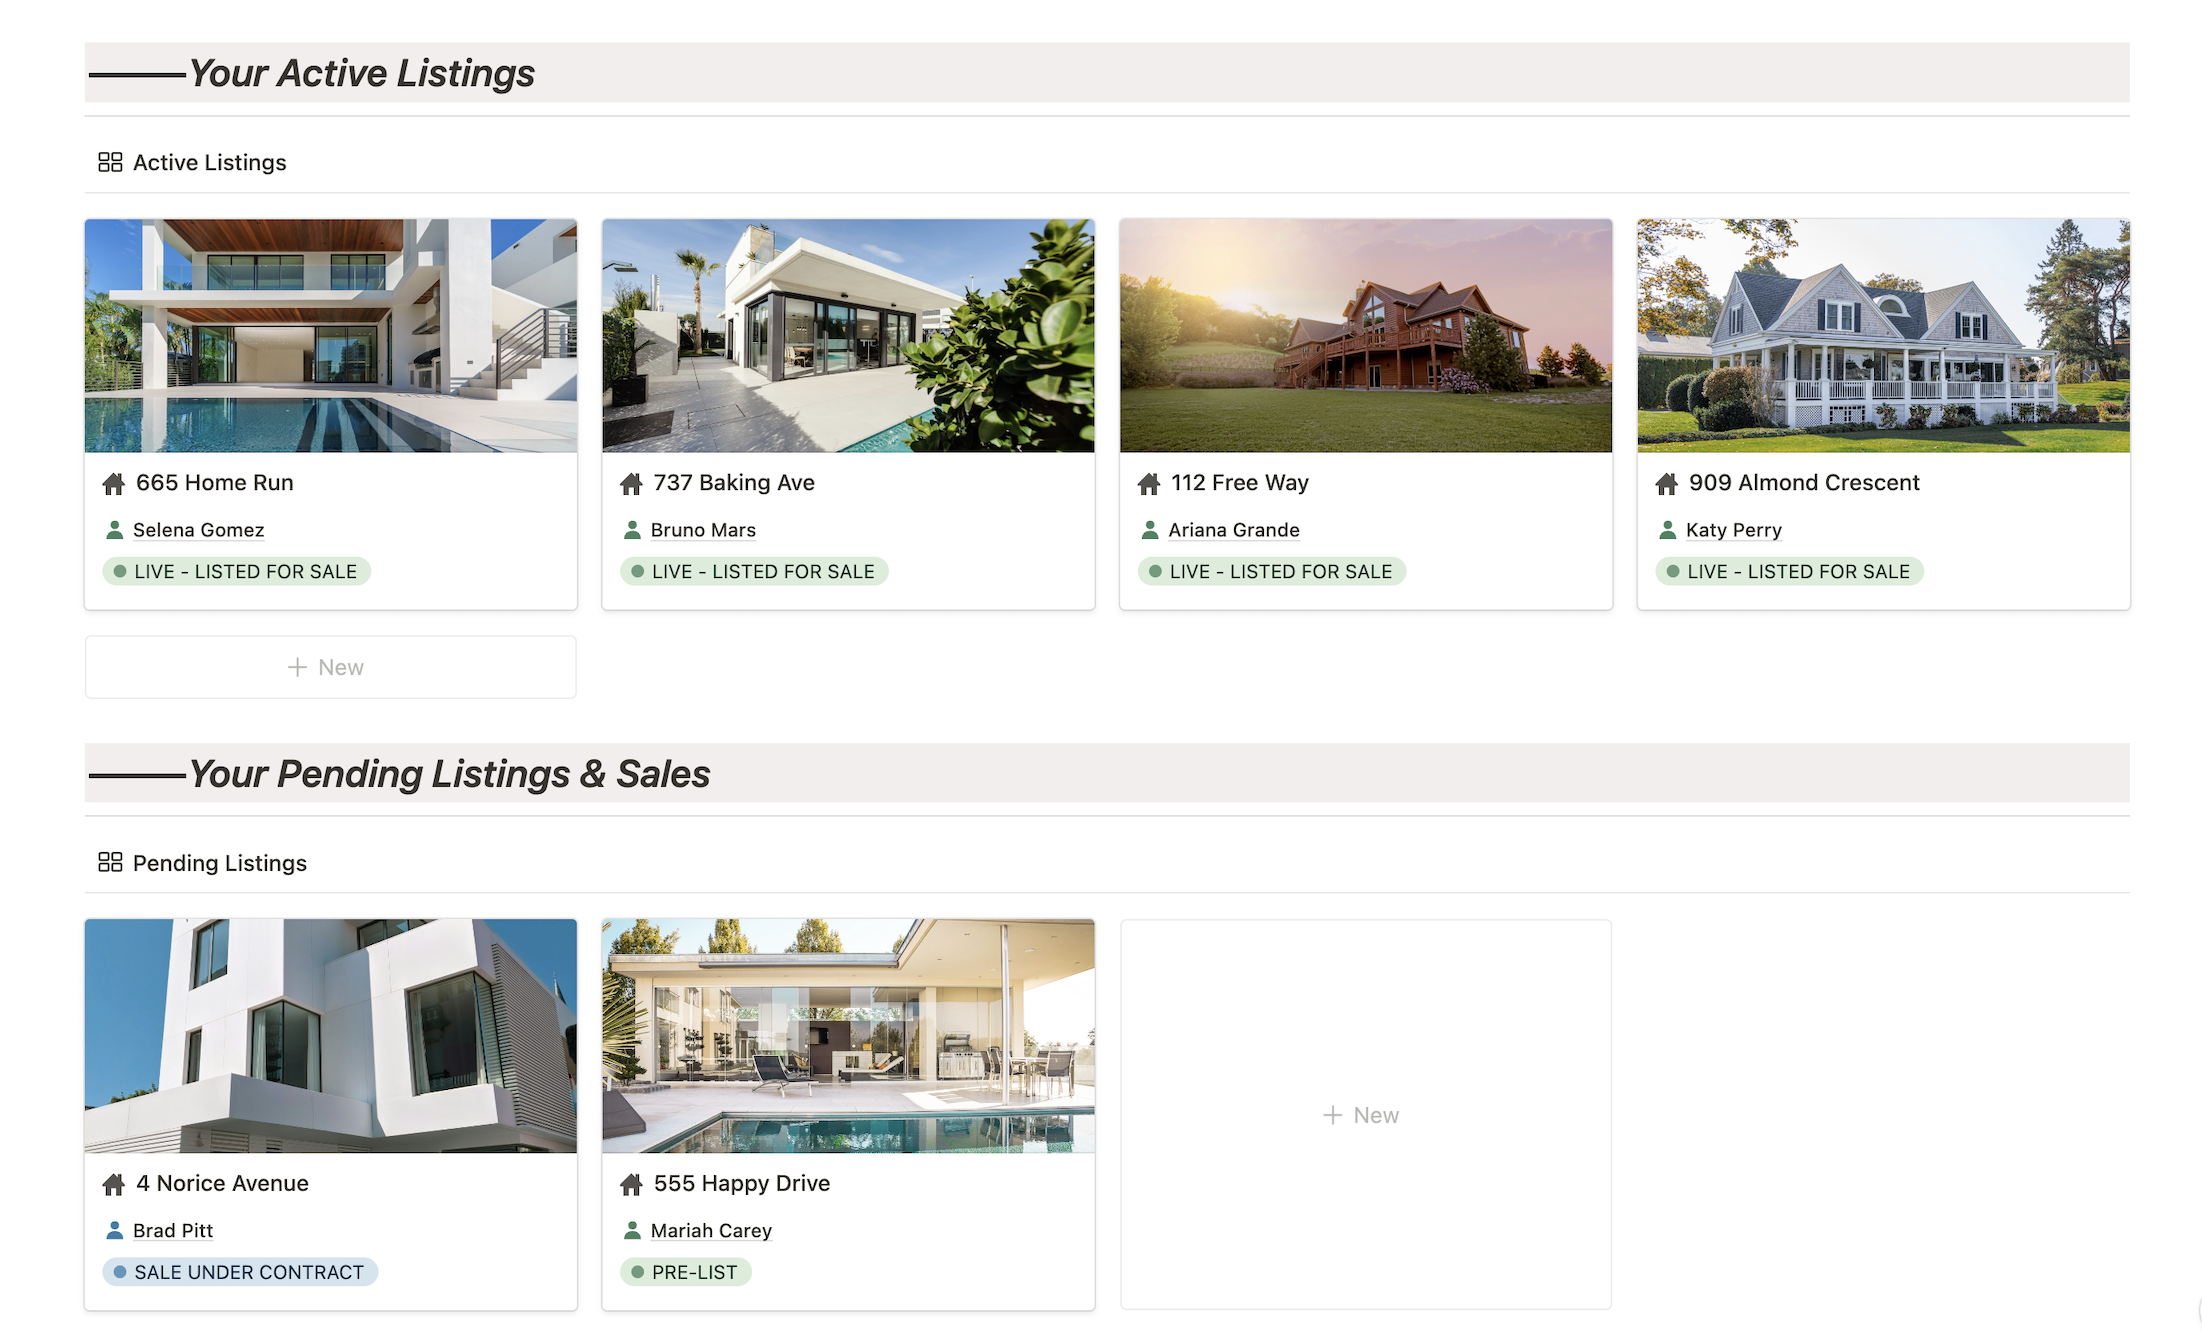 A comprehensive template that helps real estate agents organize their entire business in one place.